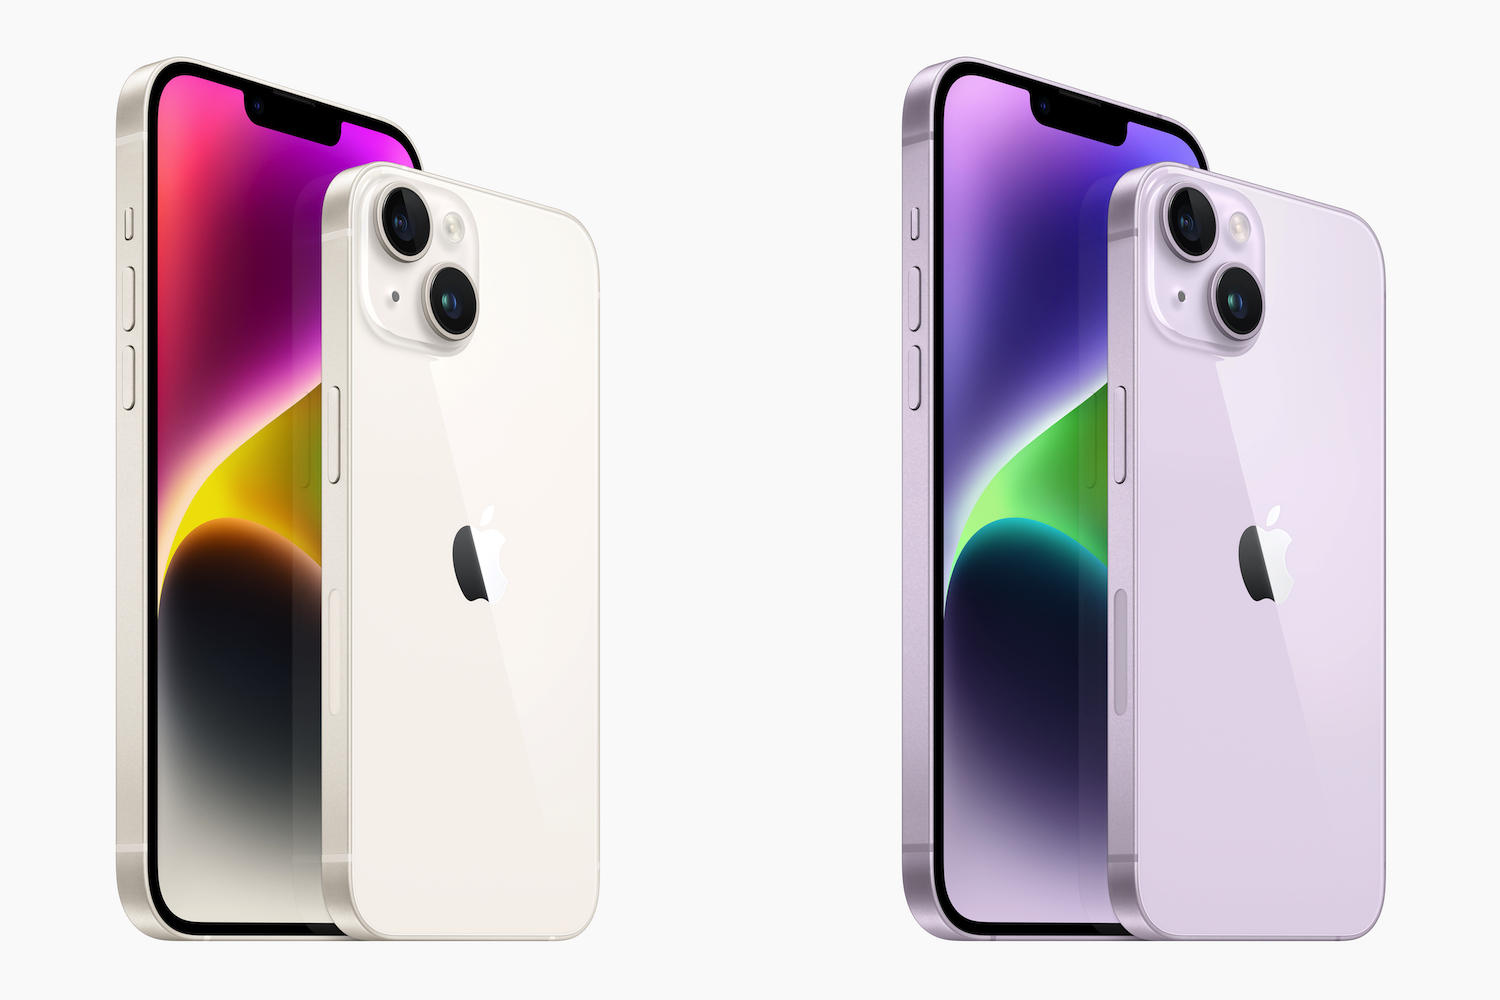 Apple iPhone 14 and iPhone 14 Plus in purple and silver colors.